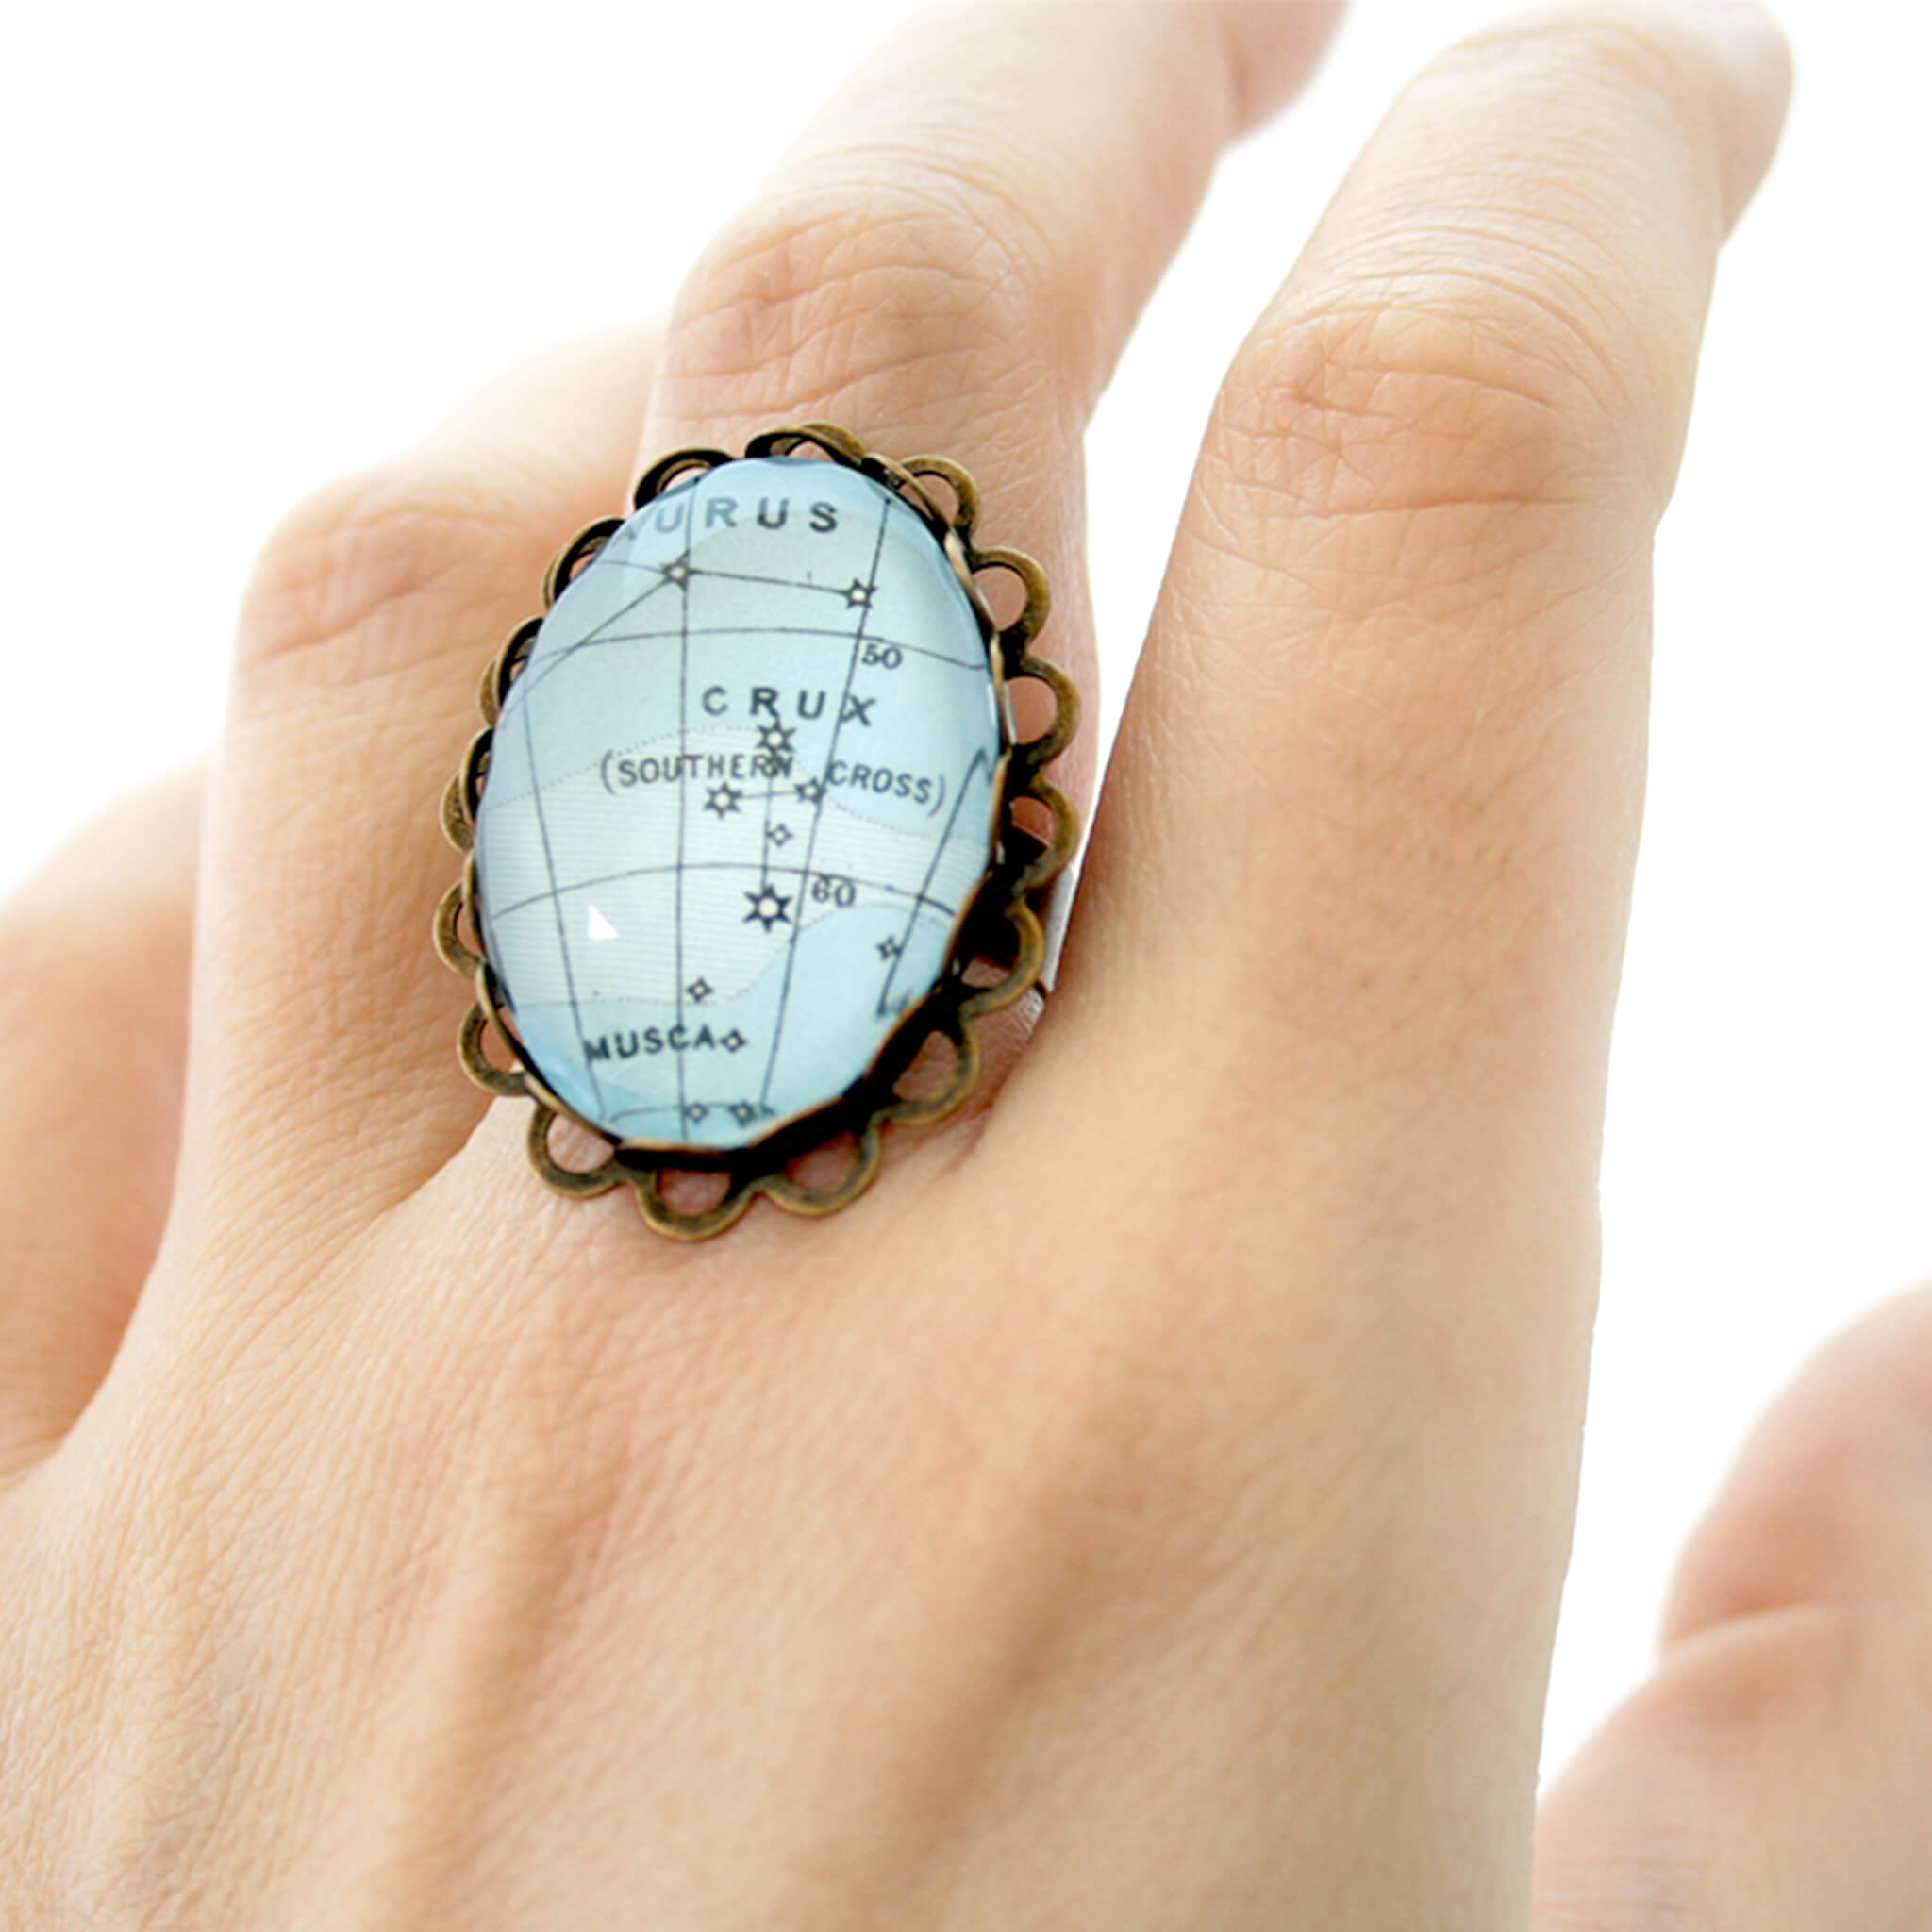 Bronze, oval ring featuring map of heaven with Crux worn on middle finger